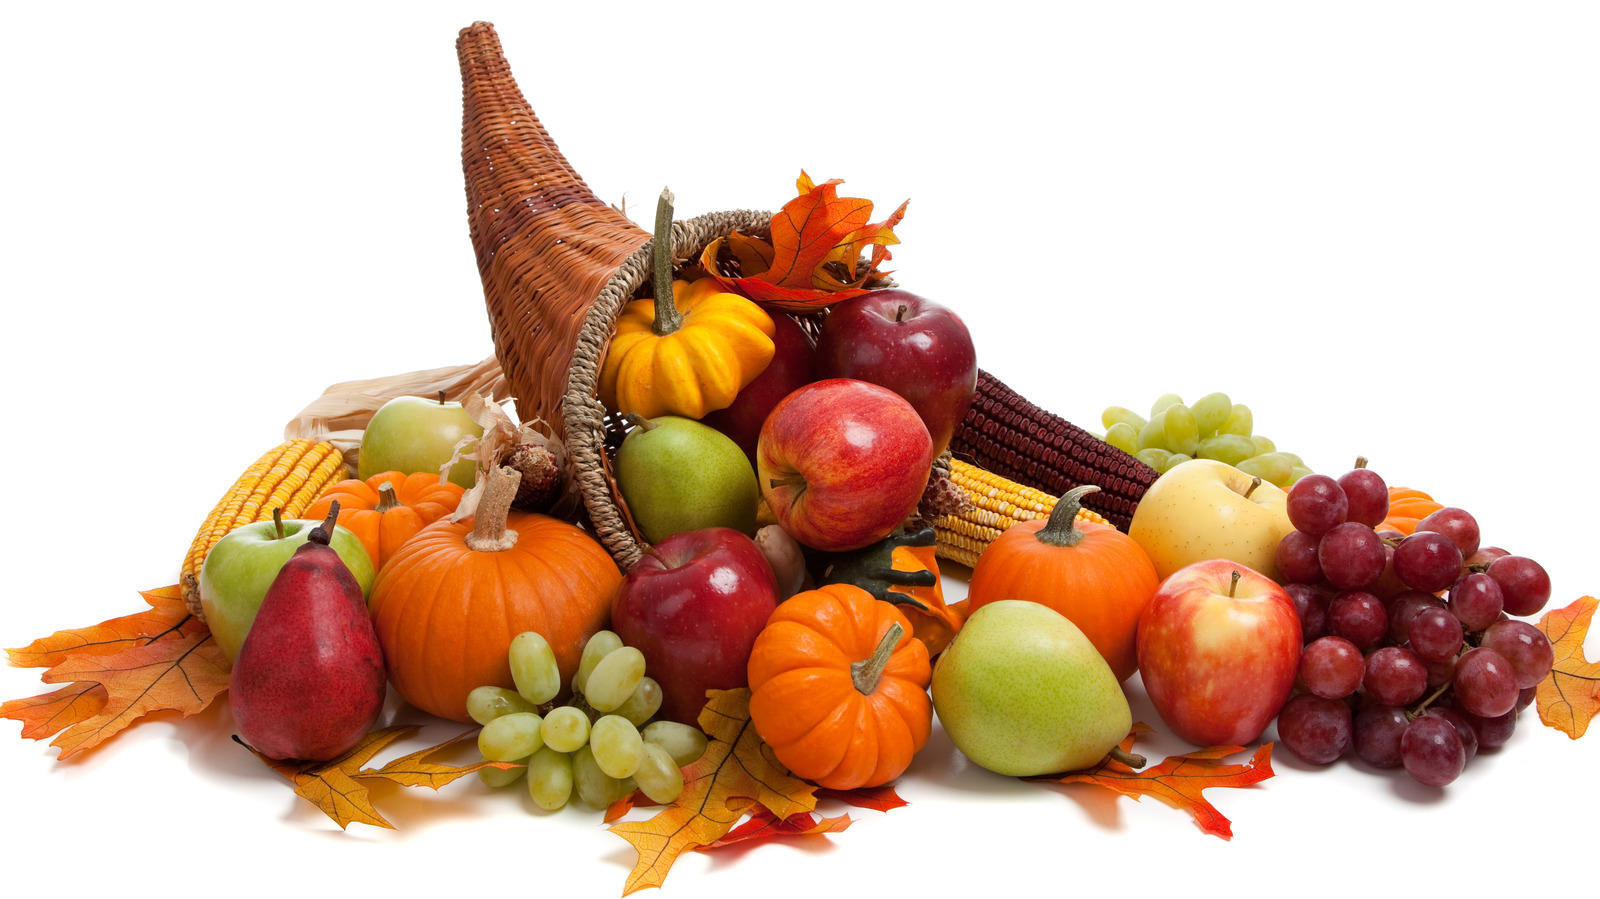 A Thanksgiving Cornucopia Actually Holds Secret, Ancient Meaning